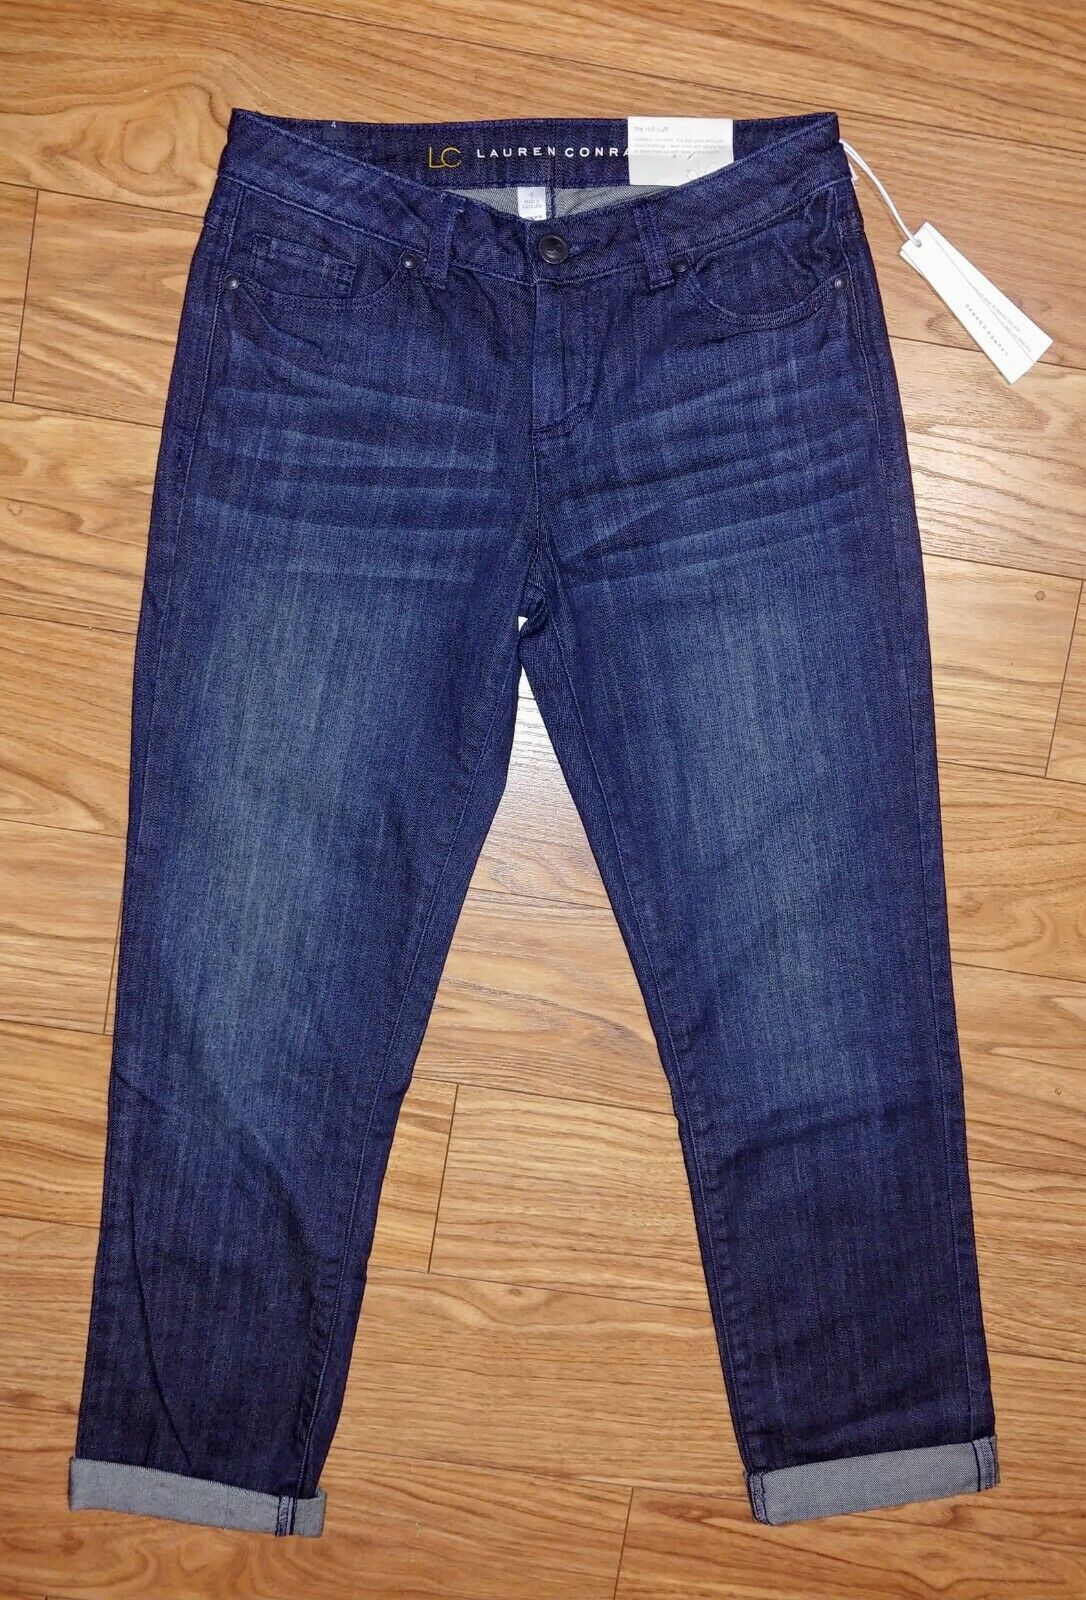 Jeans Straight By Lc Lauren Conrad Size: 4